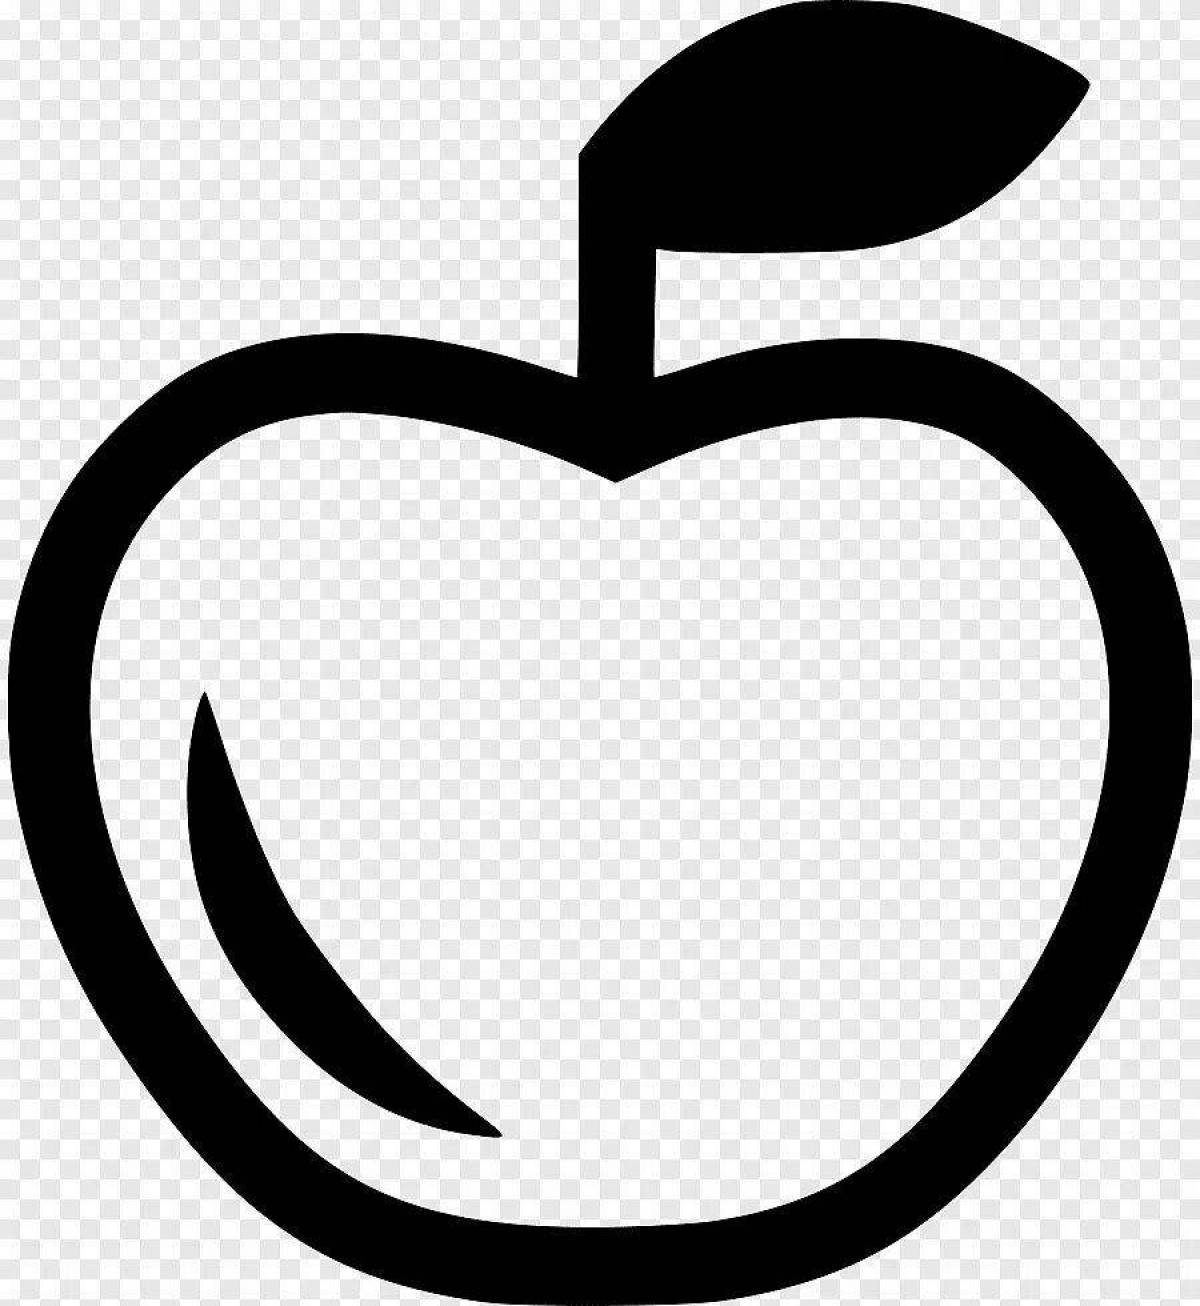 Great apple icon coloring page